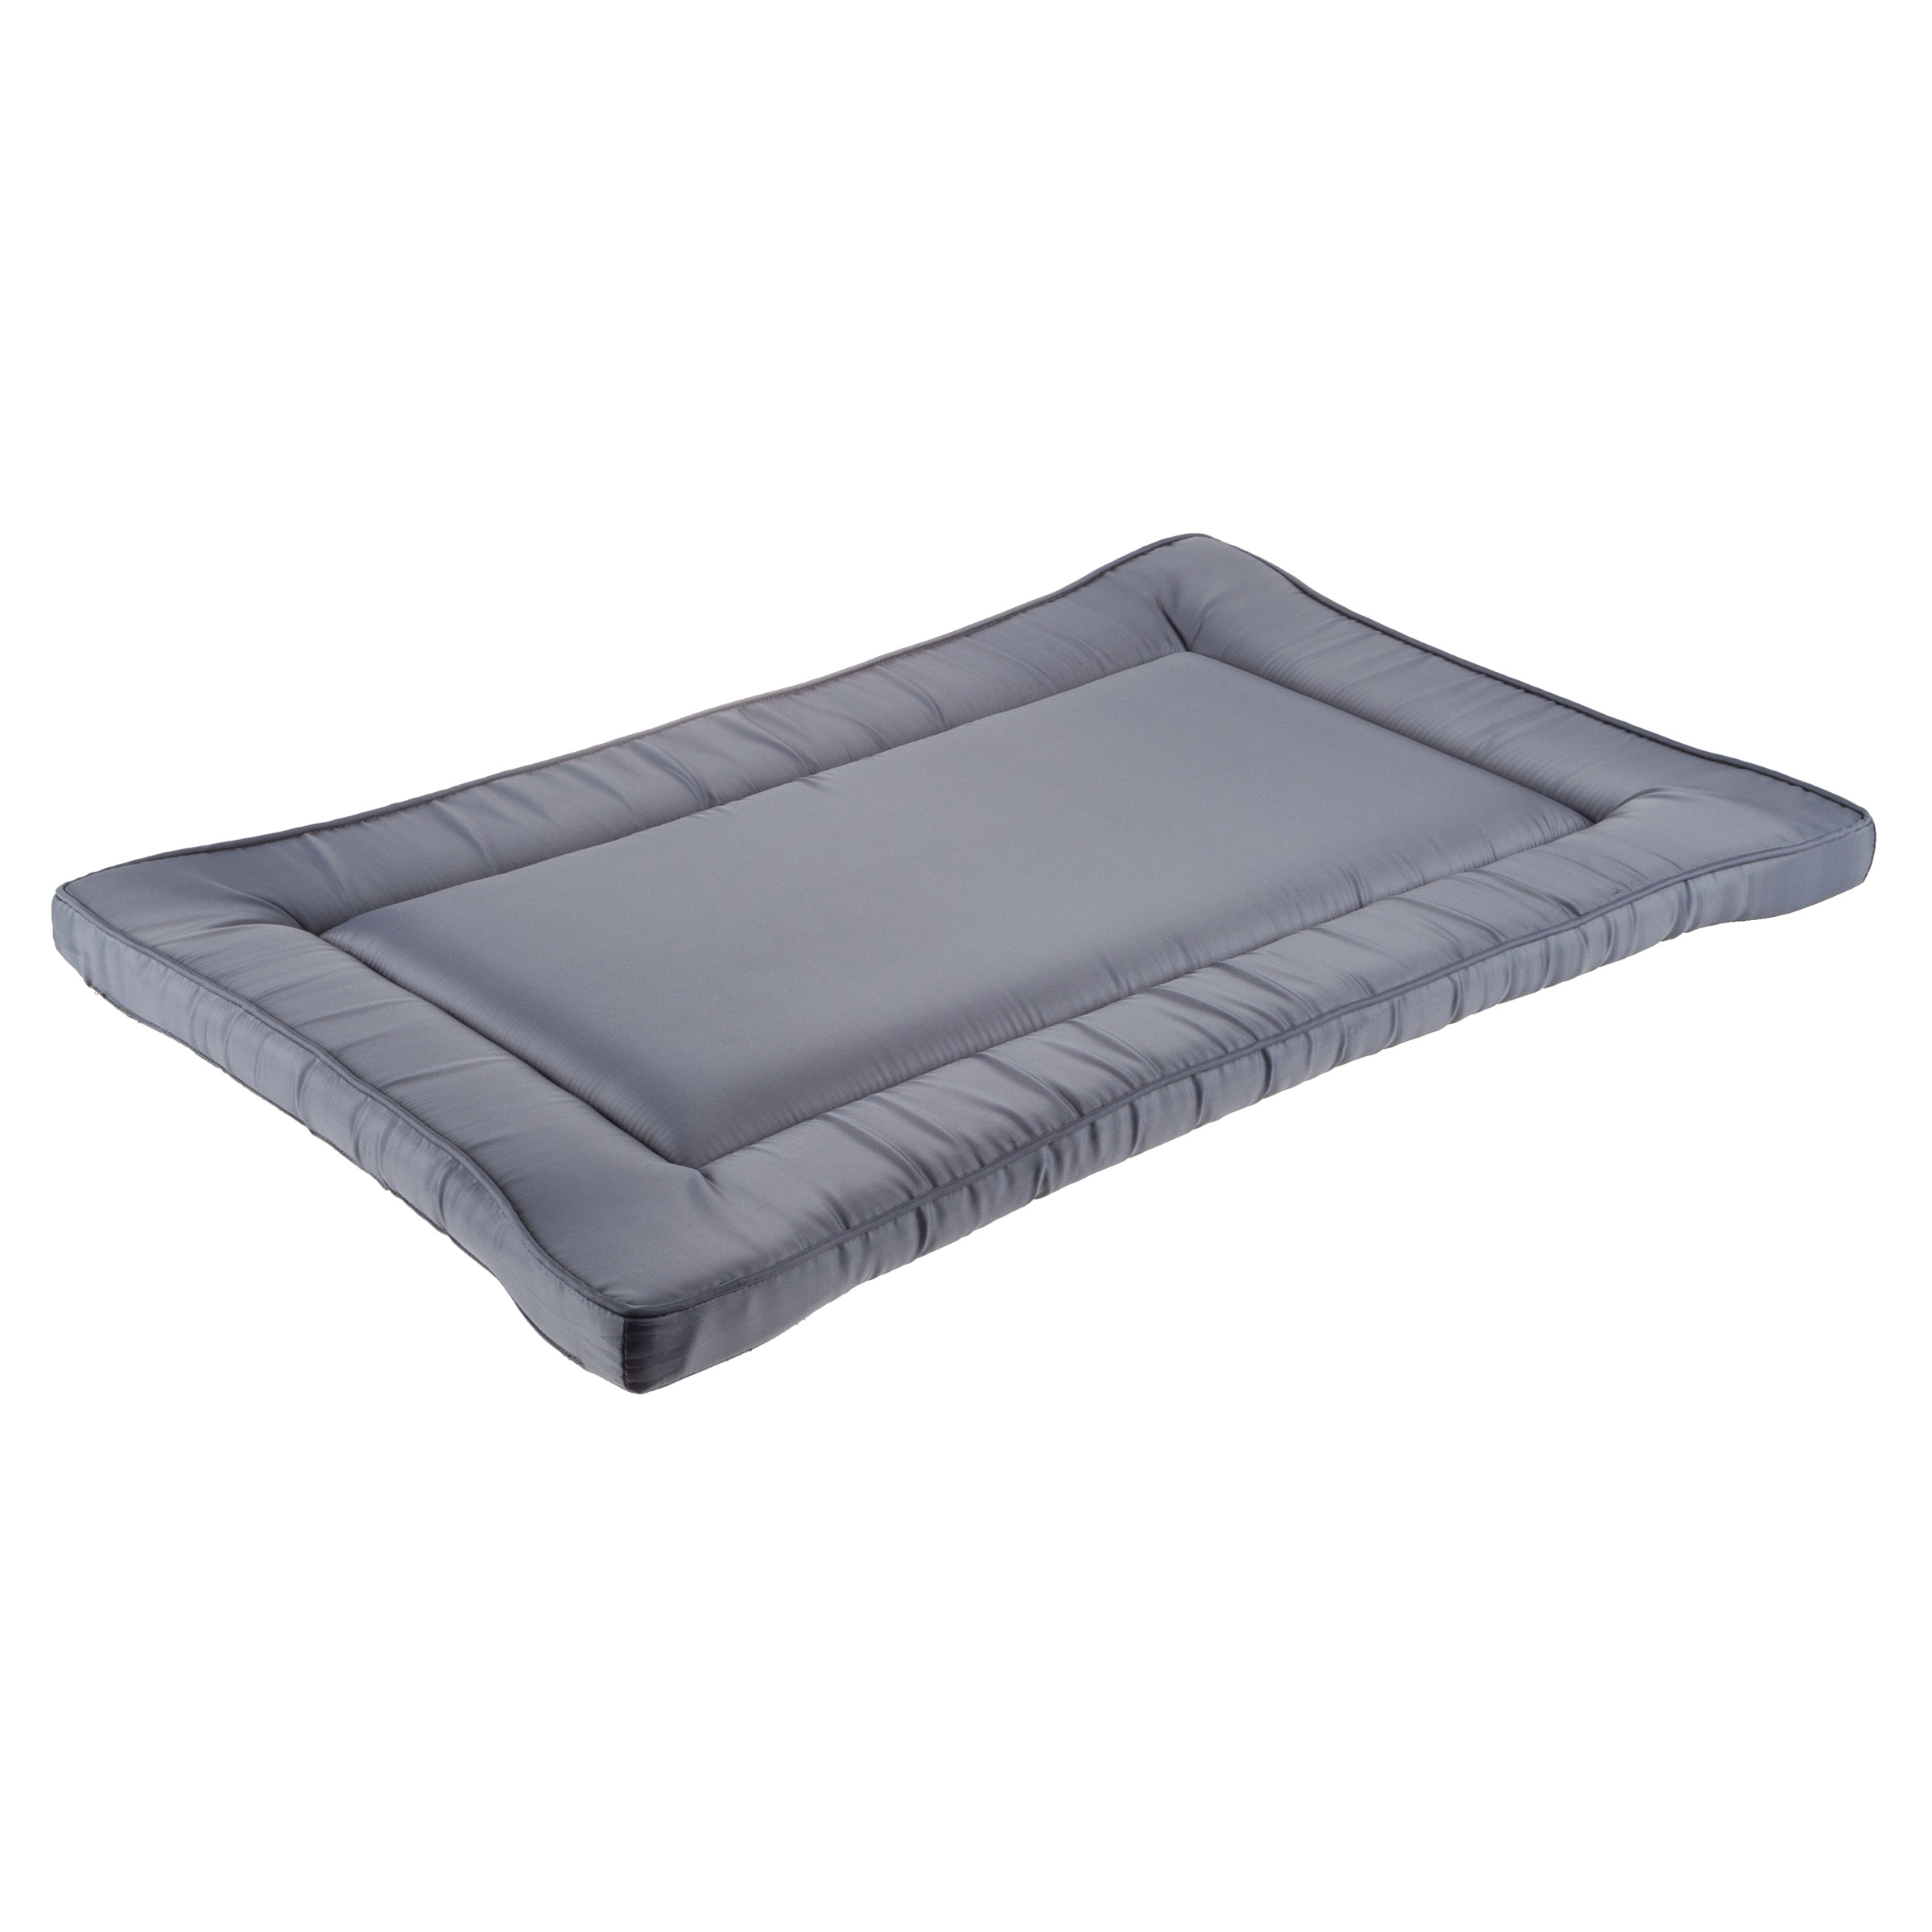 Waterproof Crate Pad Easy Clean Water Repelling Comfy Reversible Cage Bed - Gray 38 X 25